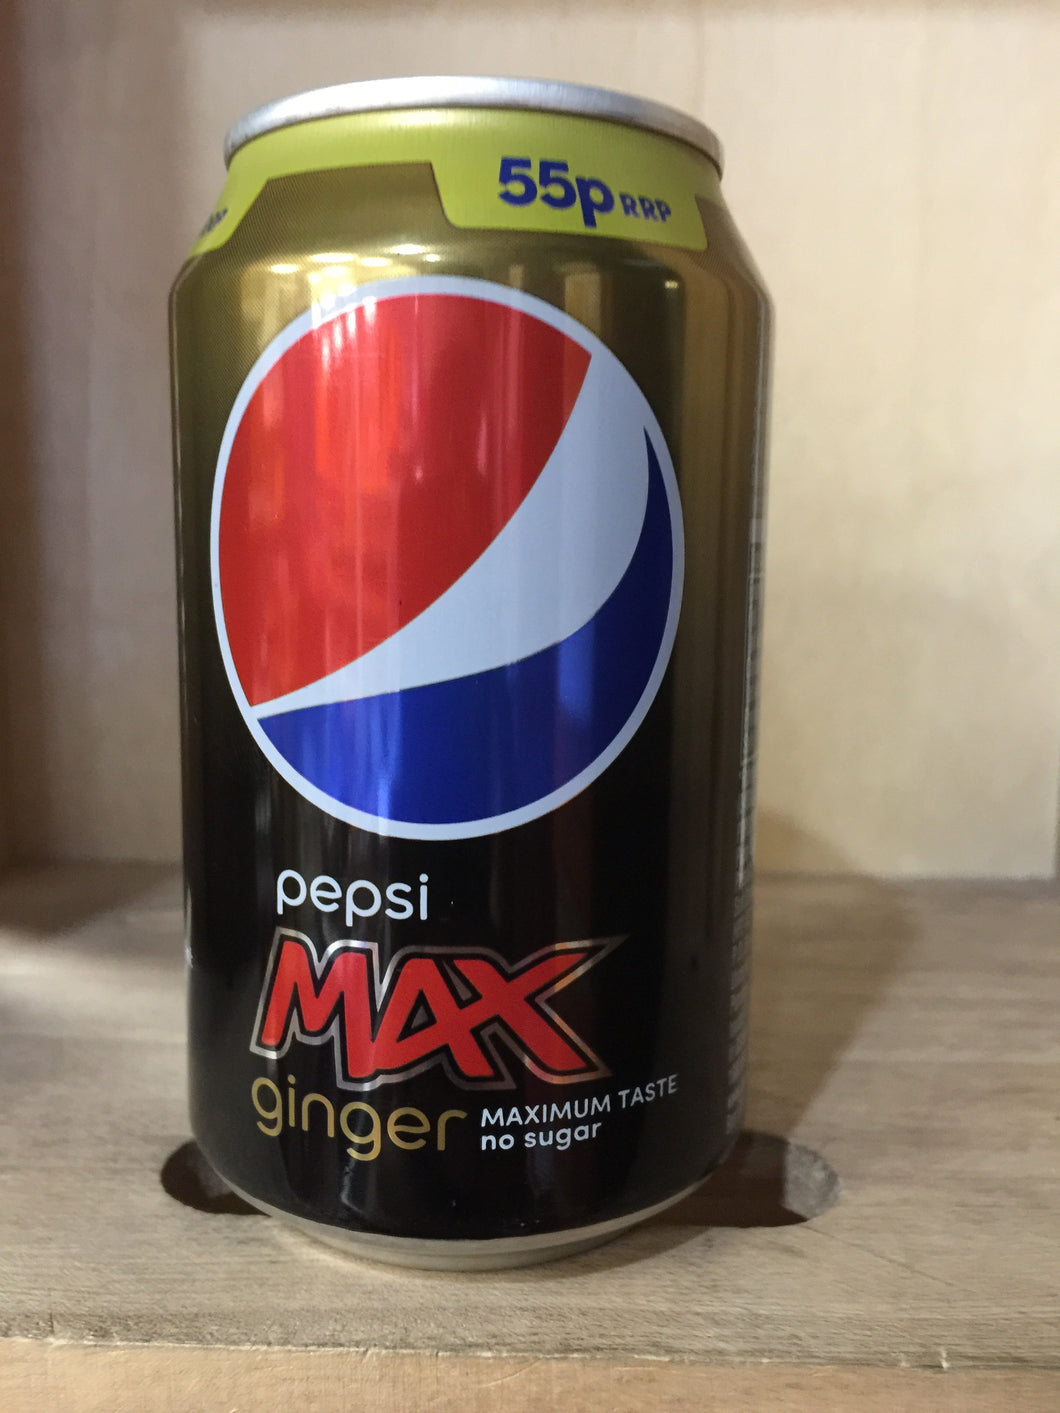 Pepsi max with ginger cans case